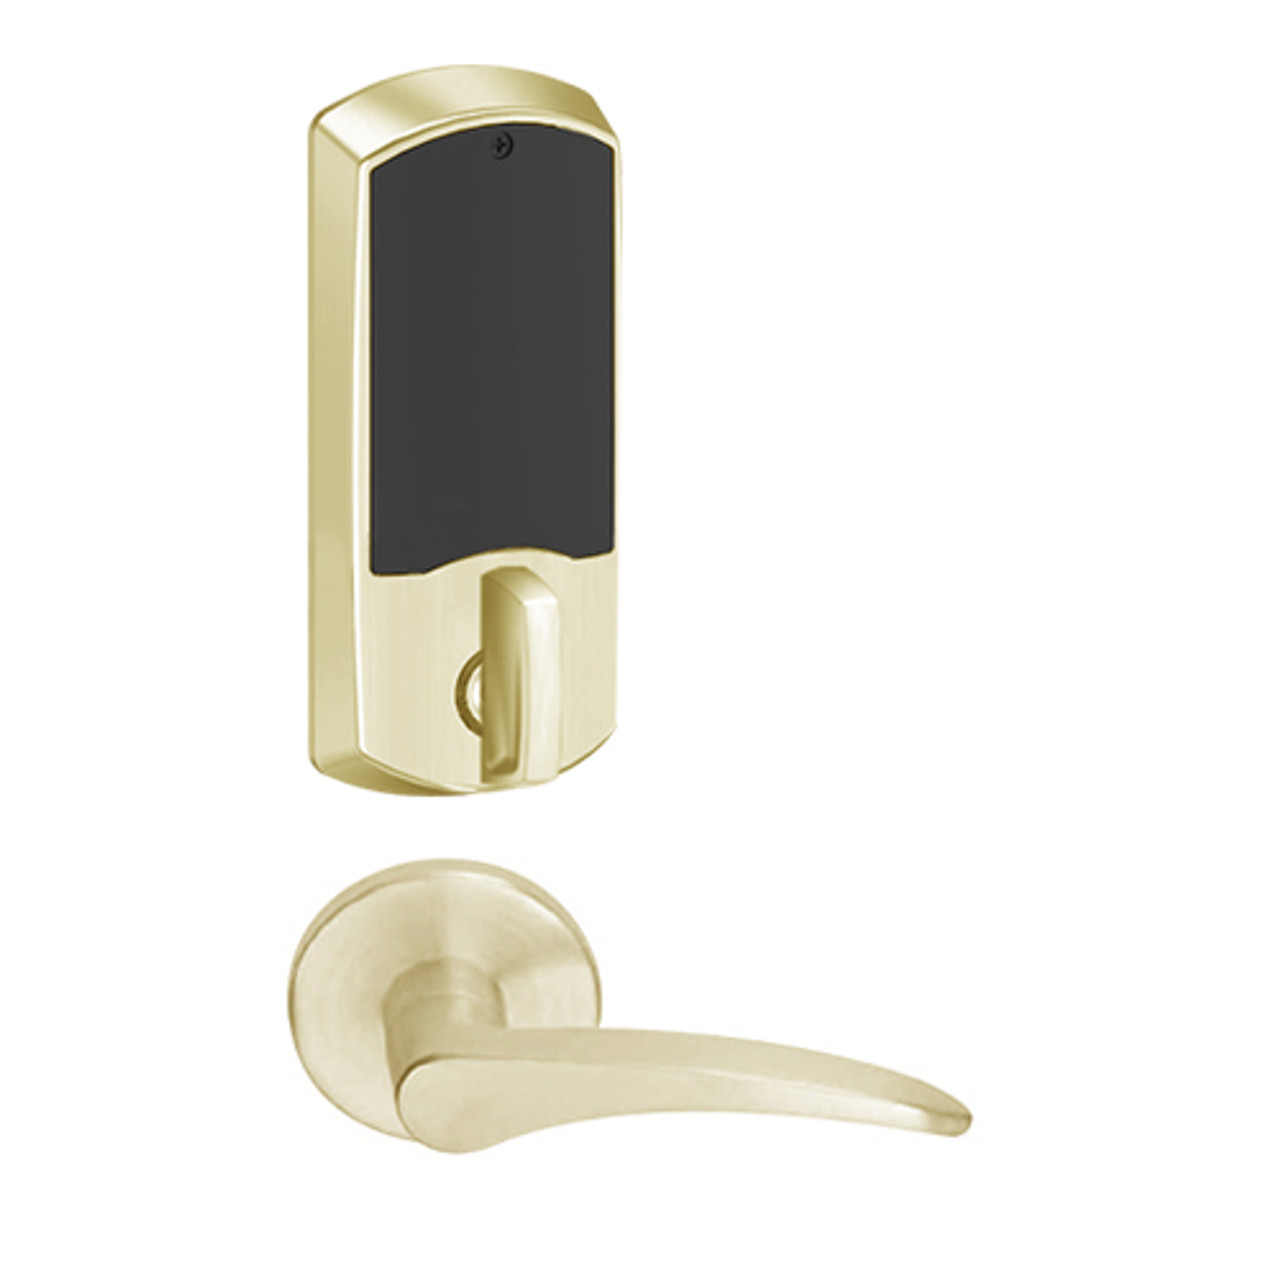 LEMD-GRW-BD-12-606-00A-RH Schlage Privacy/Apartment Wireless Greenwich Mortise Deadbolt Lock with LED and 12 Lever Prepped for SFIC in Satin Brass